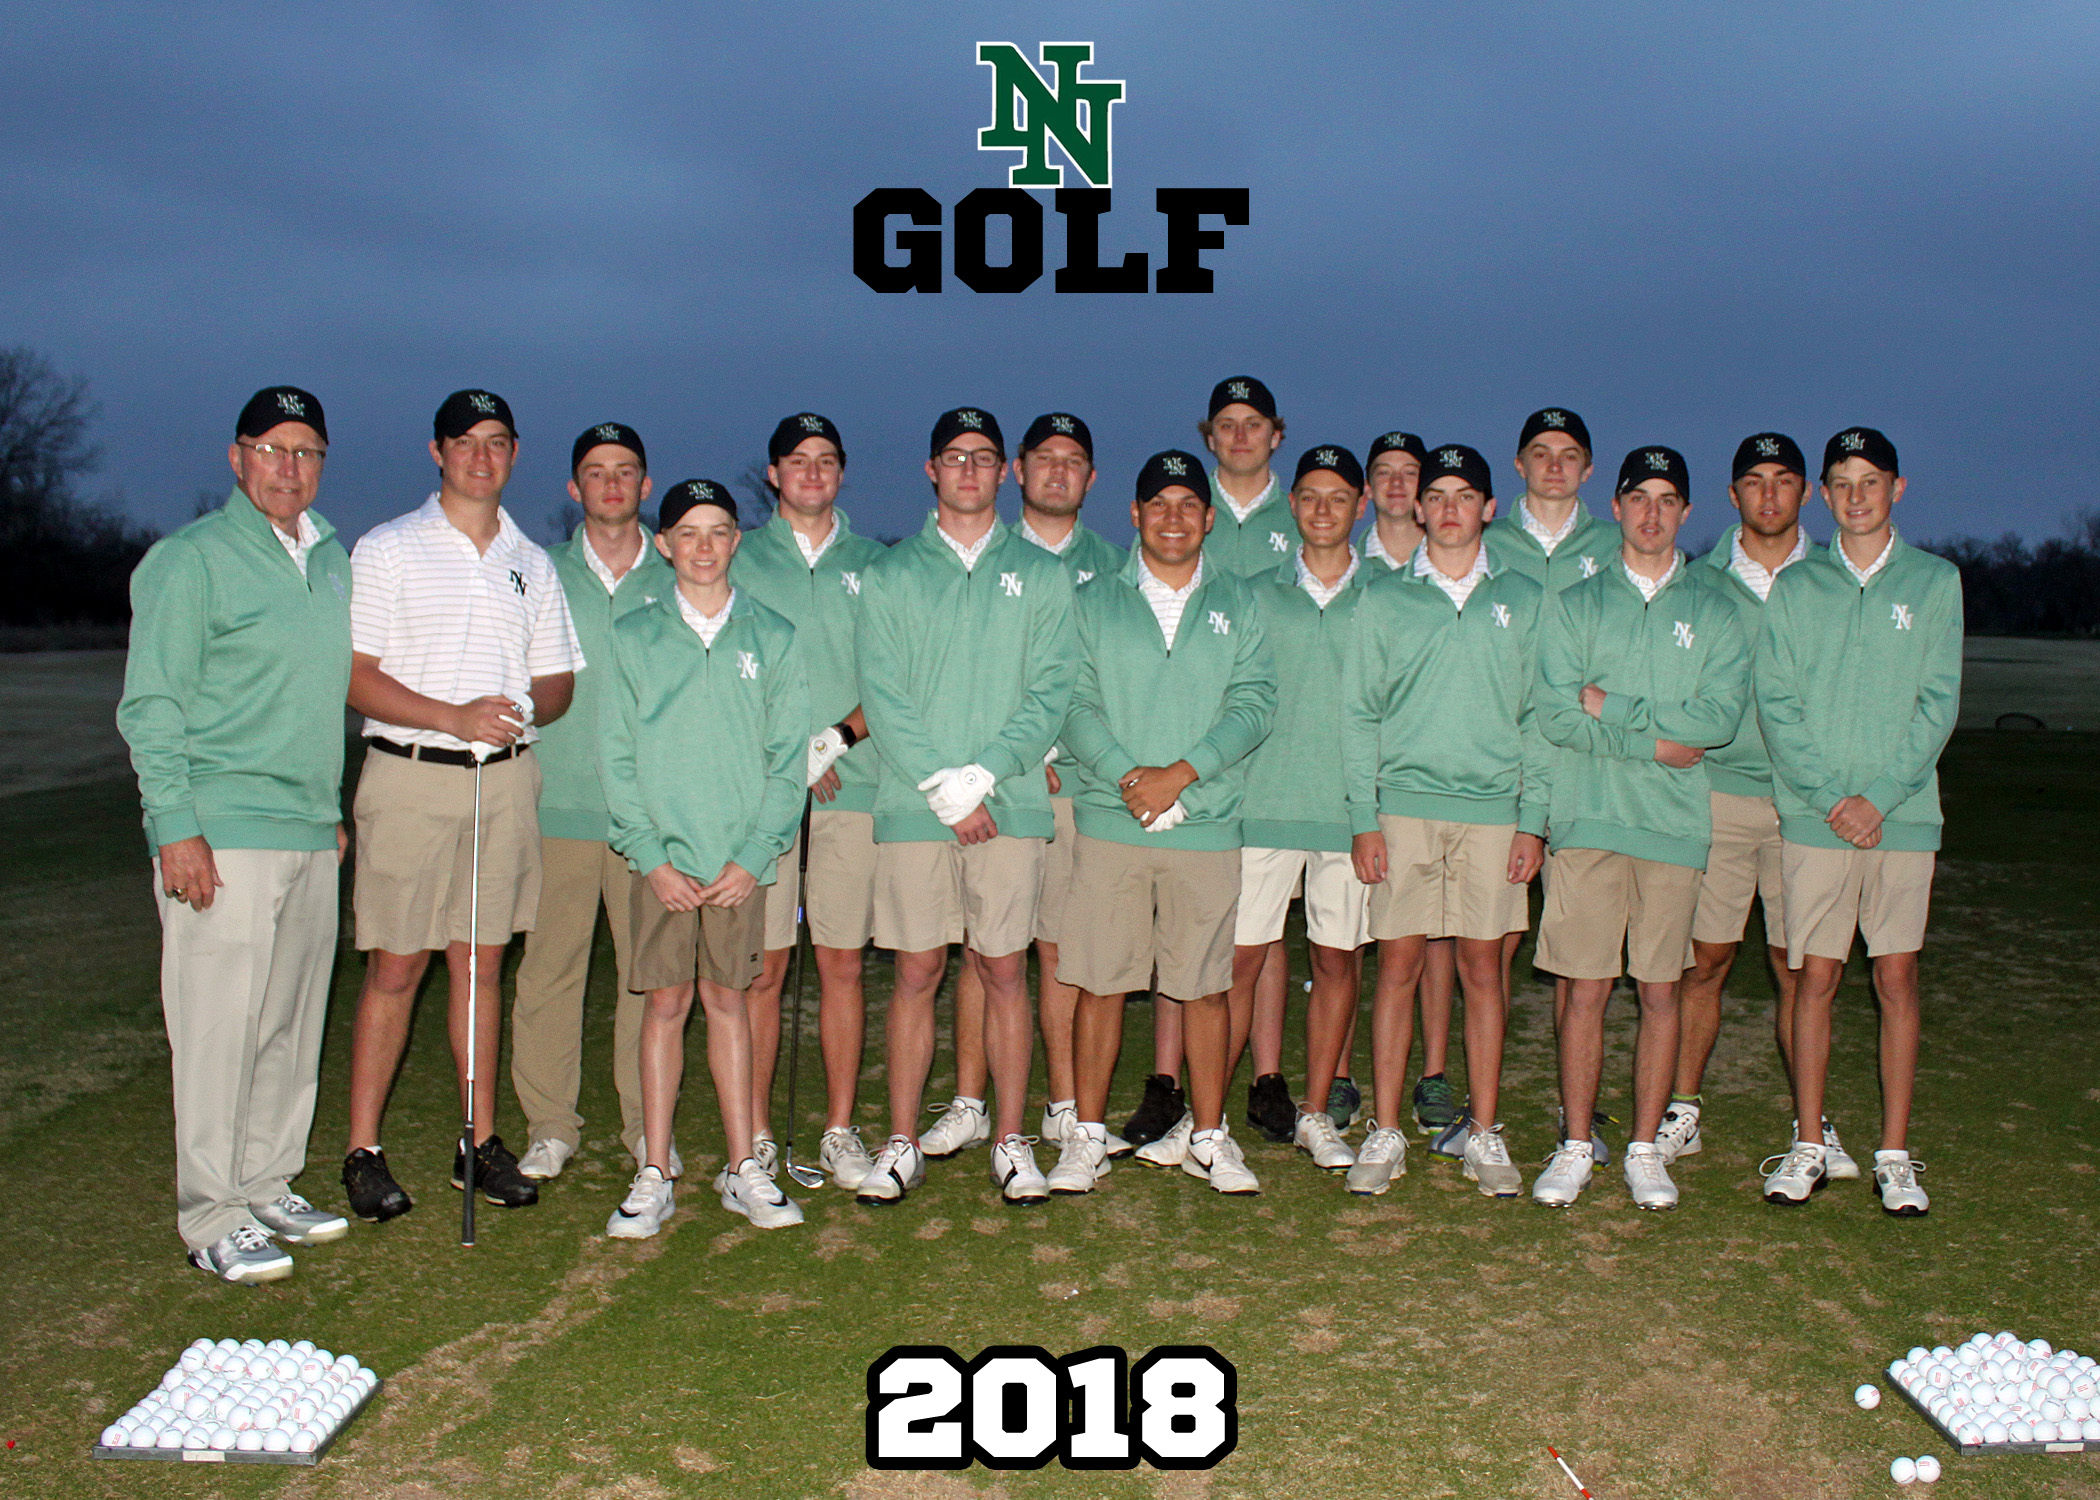 NN golf low light with flash and date corrected 5x7_.jpg